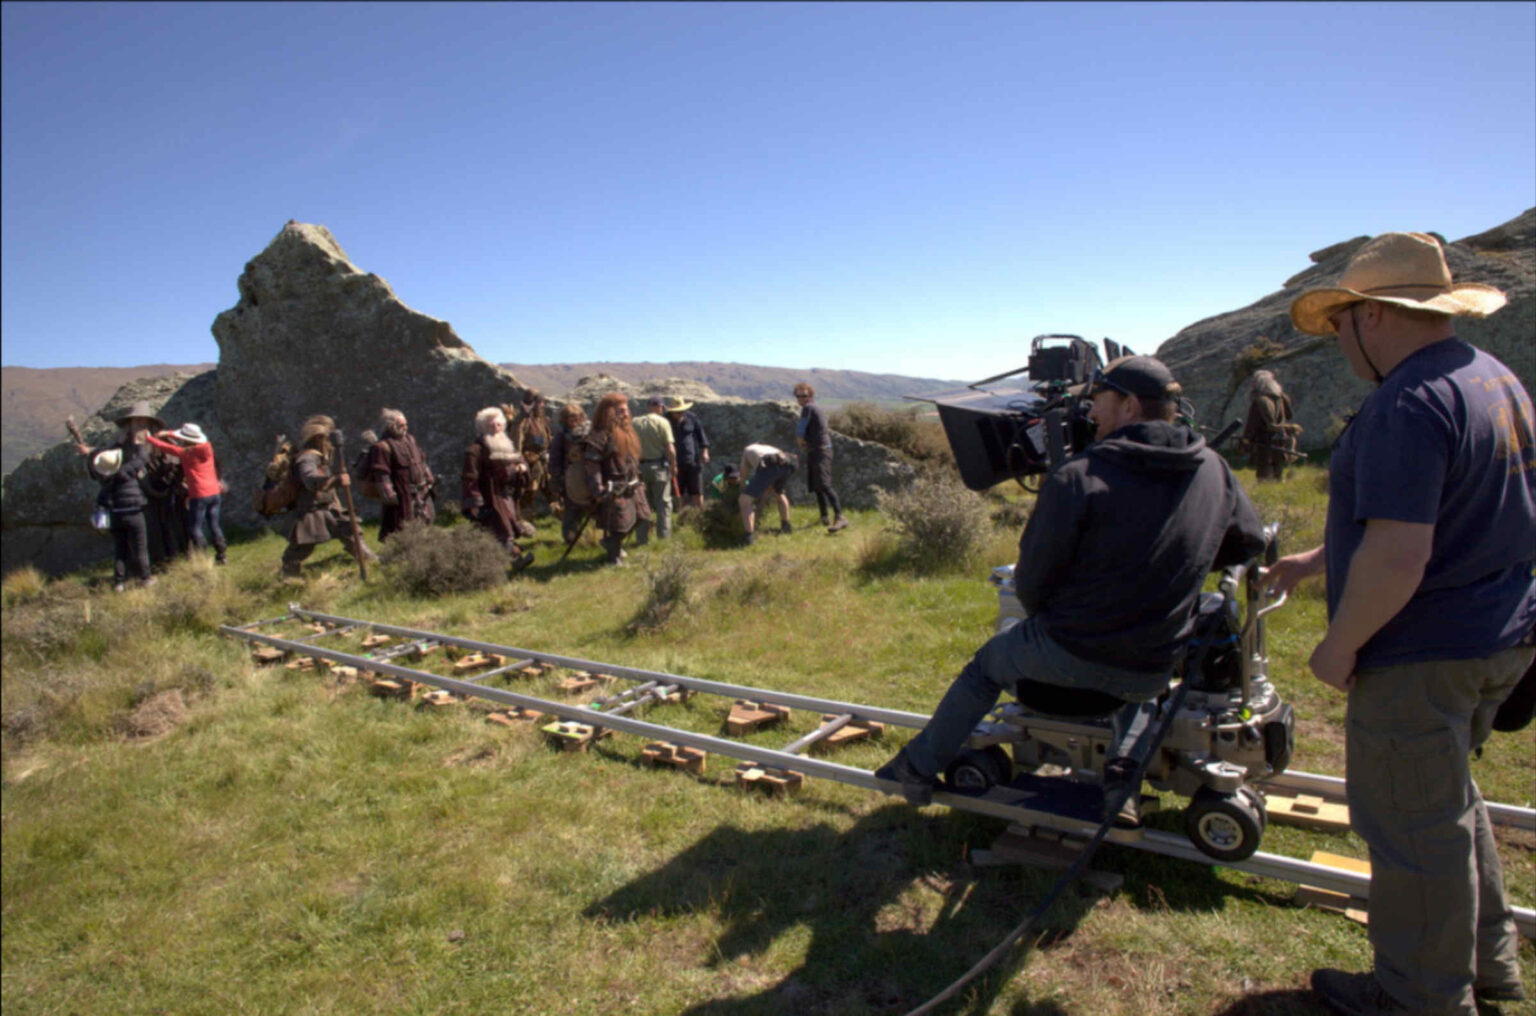 New Zealand is the go-to filming location for some of your favorite directors, so get into the many diverse movies it produces!